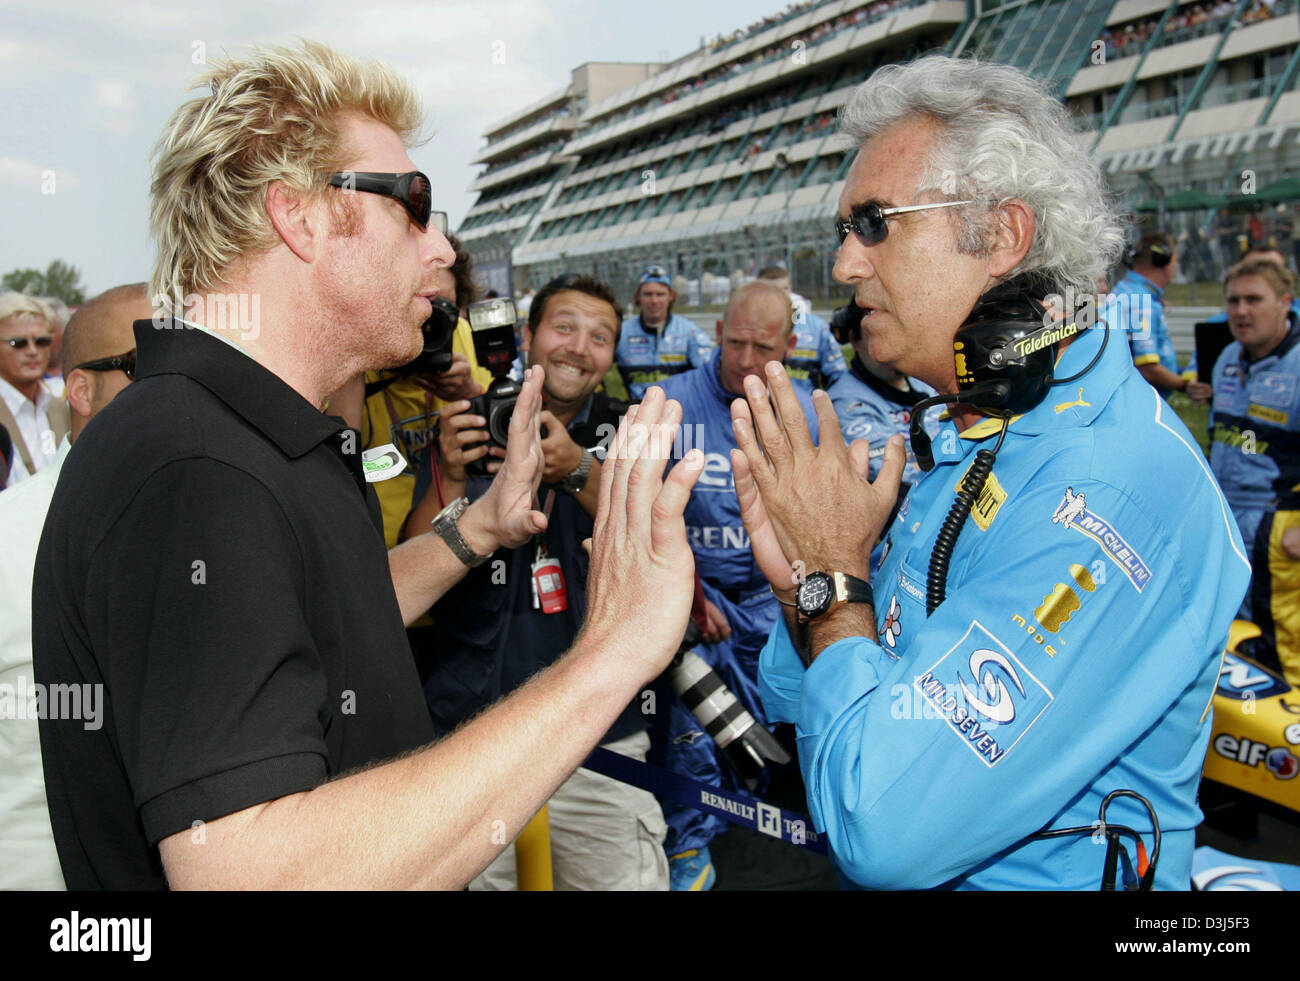 (dpa) - Former tennis player German Boris Becker (L) and Renault team principal Italian Flavio Briatore meet before the start of the European Grand Prix at the 'Nuerburgring' racetrack in Nuerburg, Germany, Sunday 29 May 2005. Stock Photo